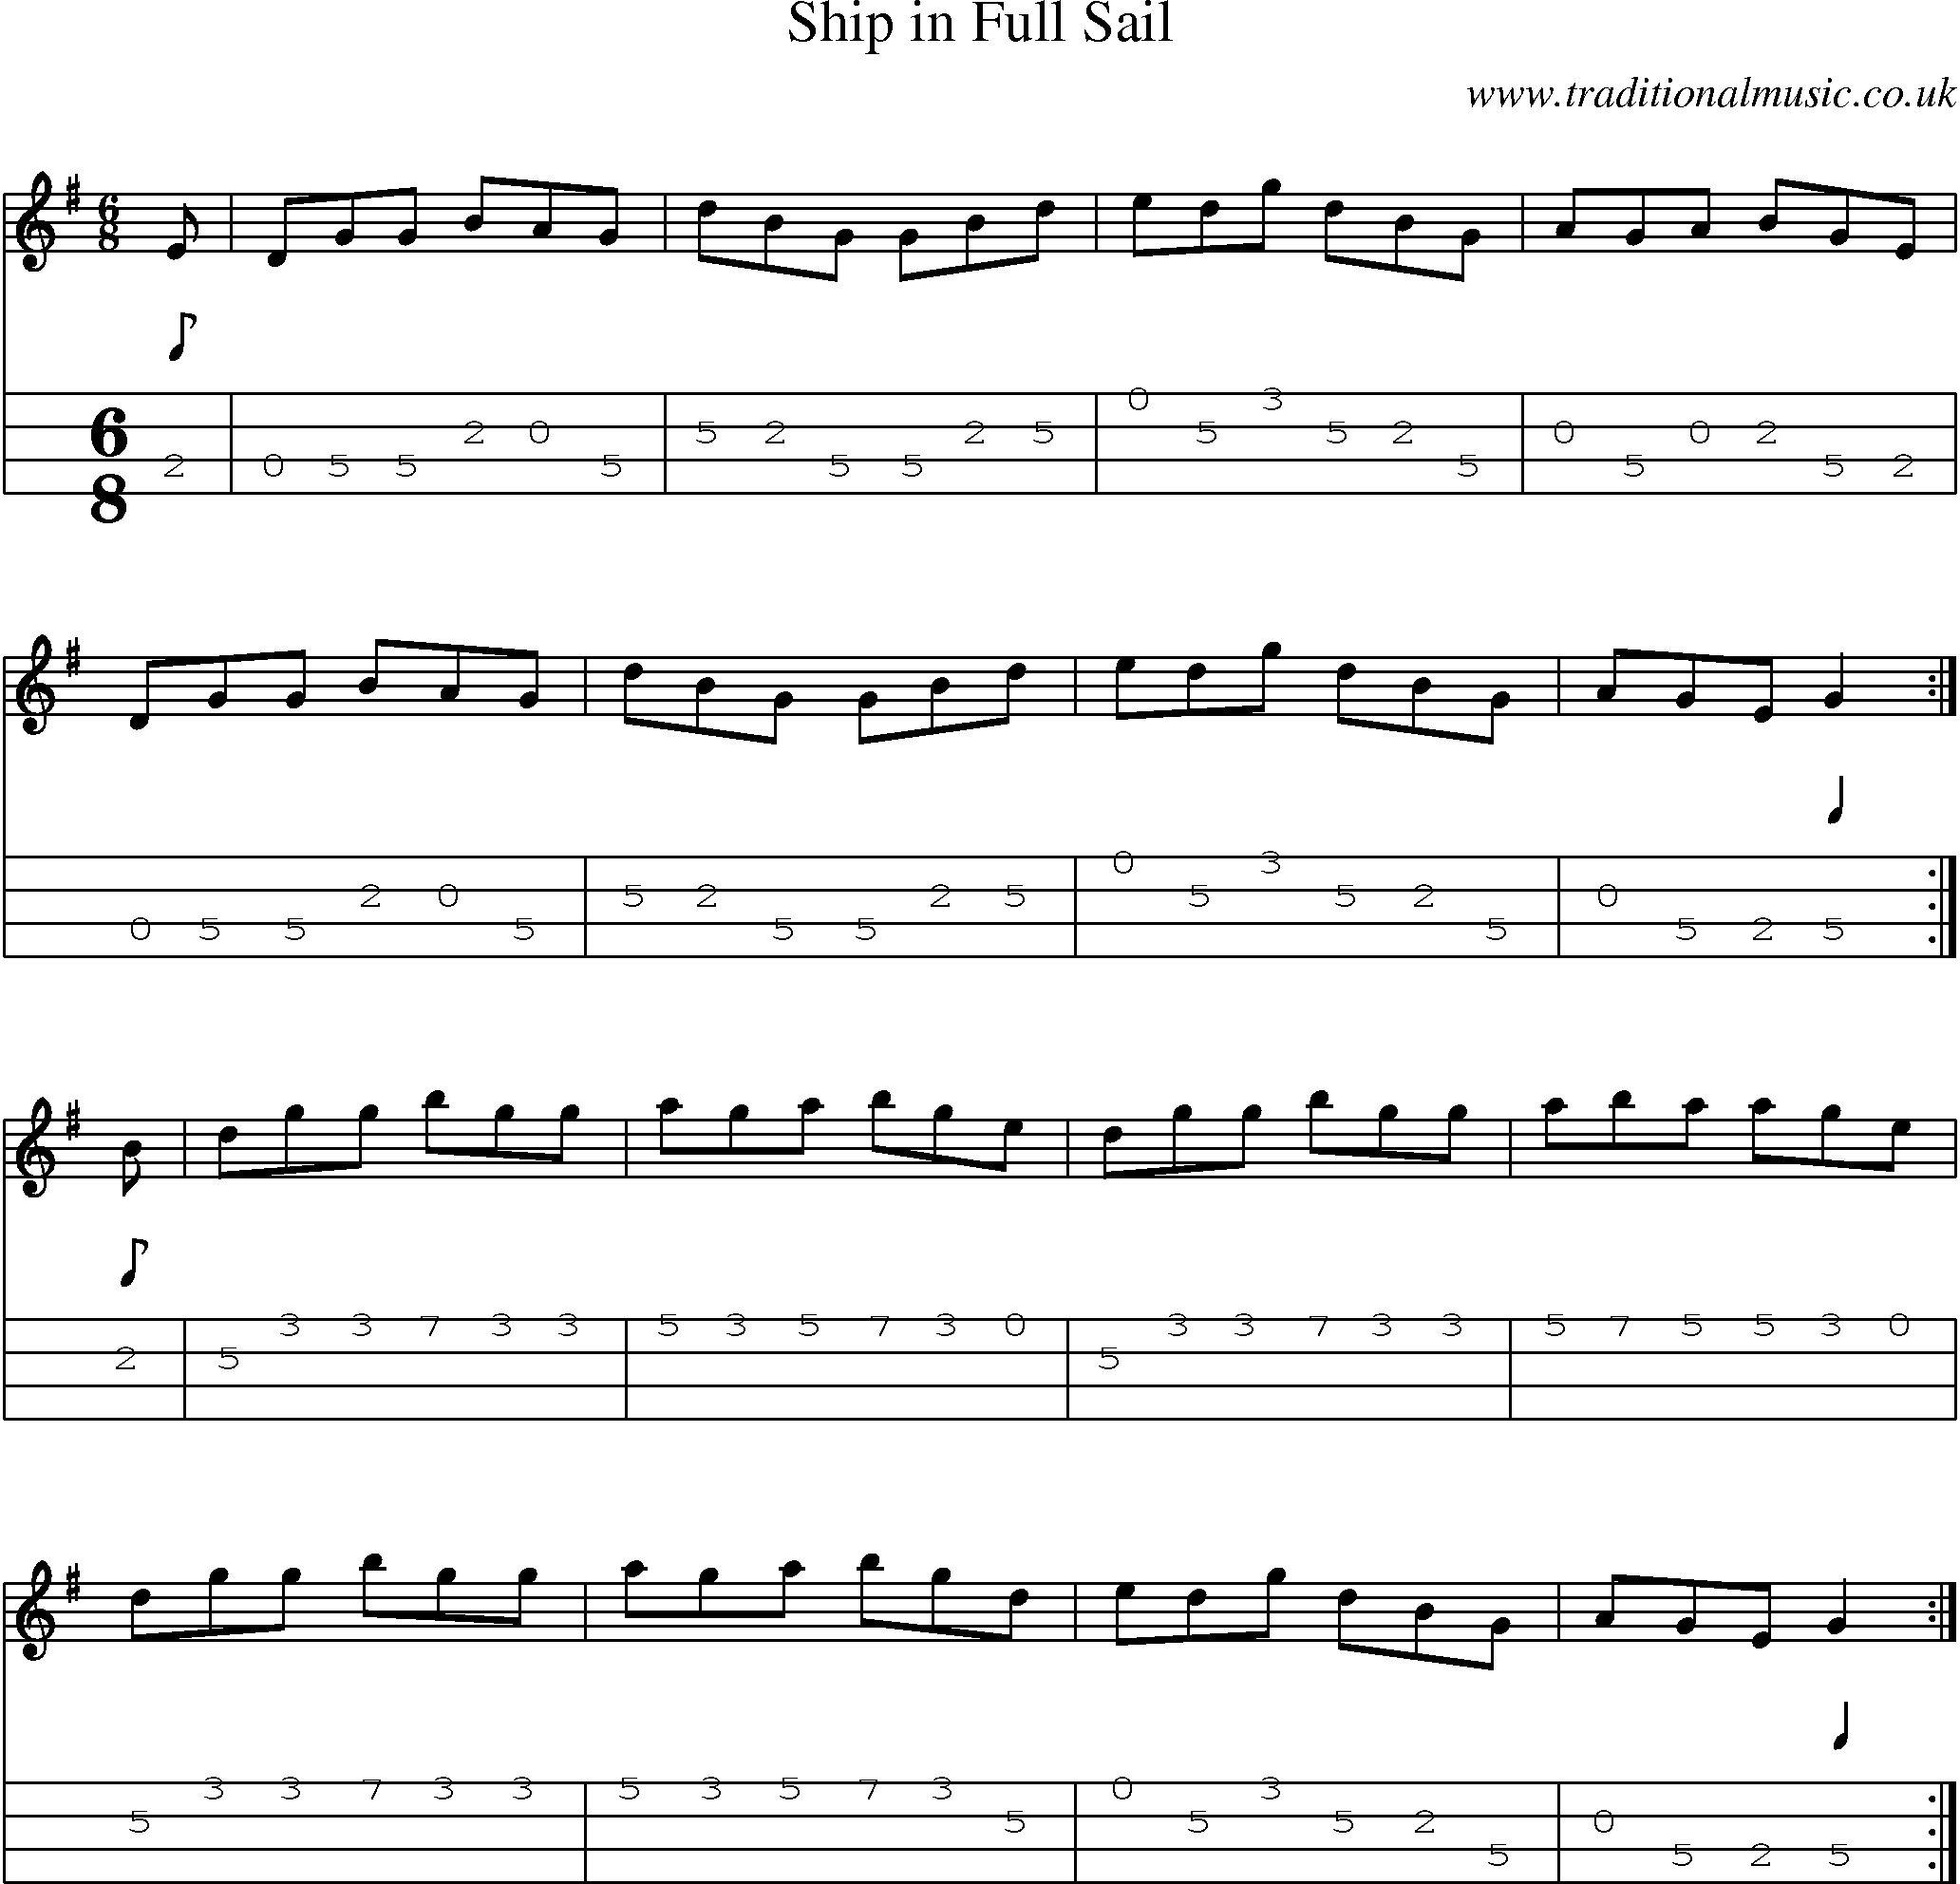 Music Score and Mandolin Tabs for Ship In Full Sail